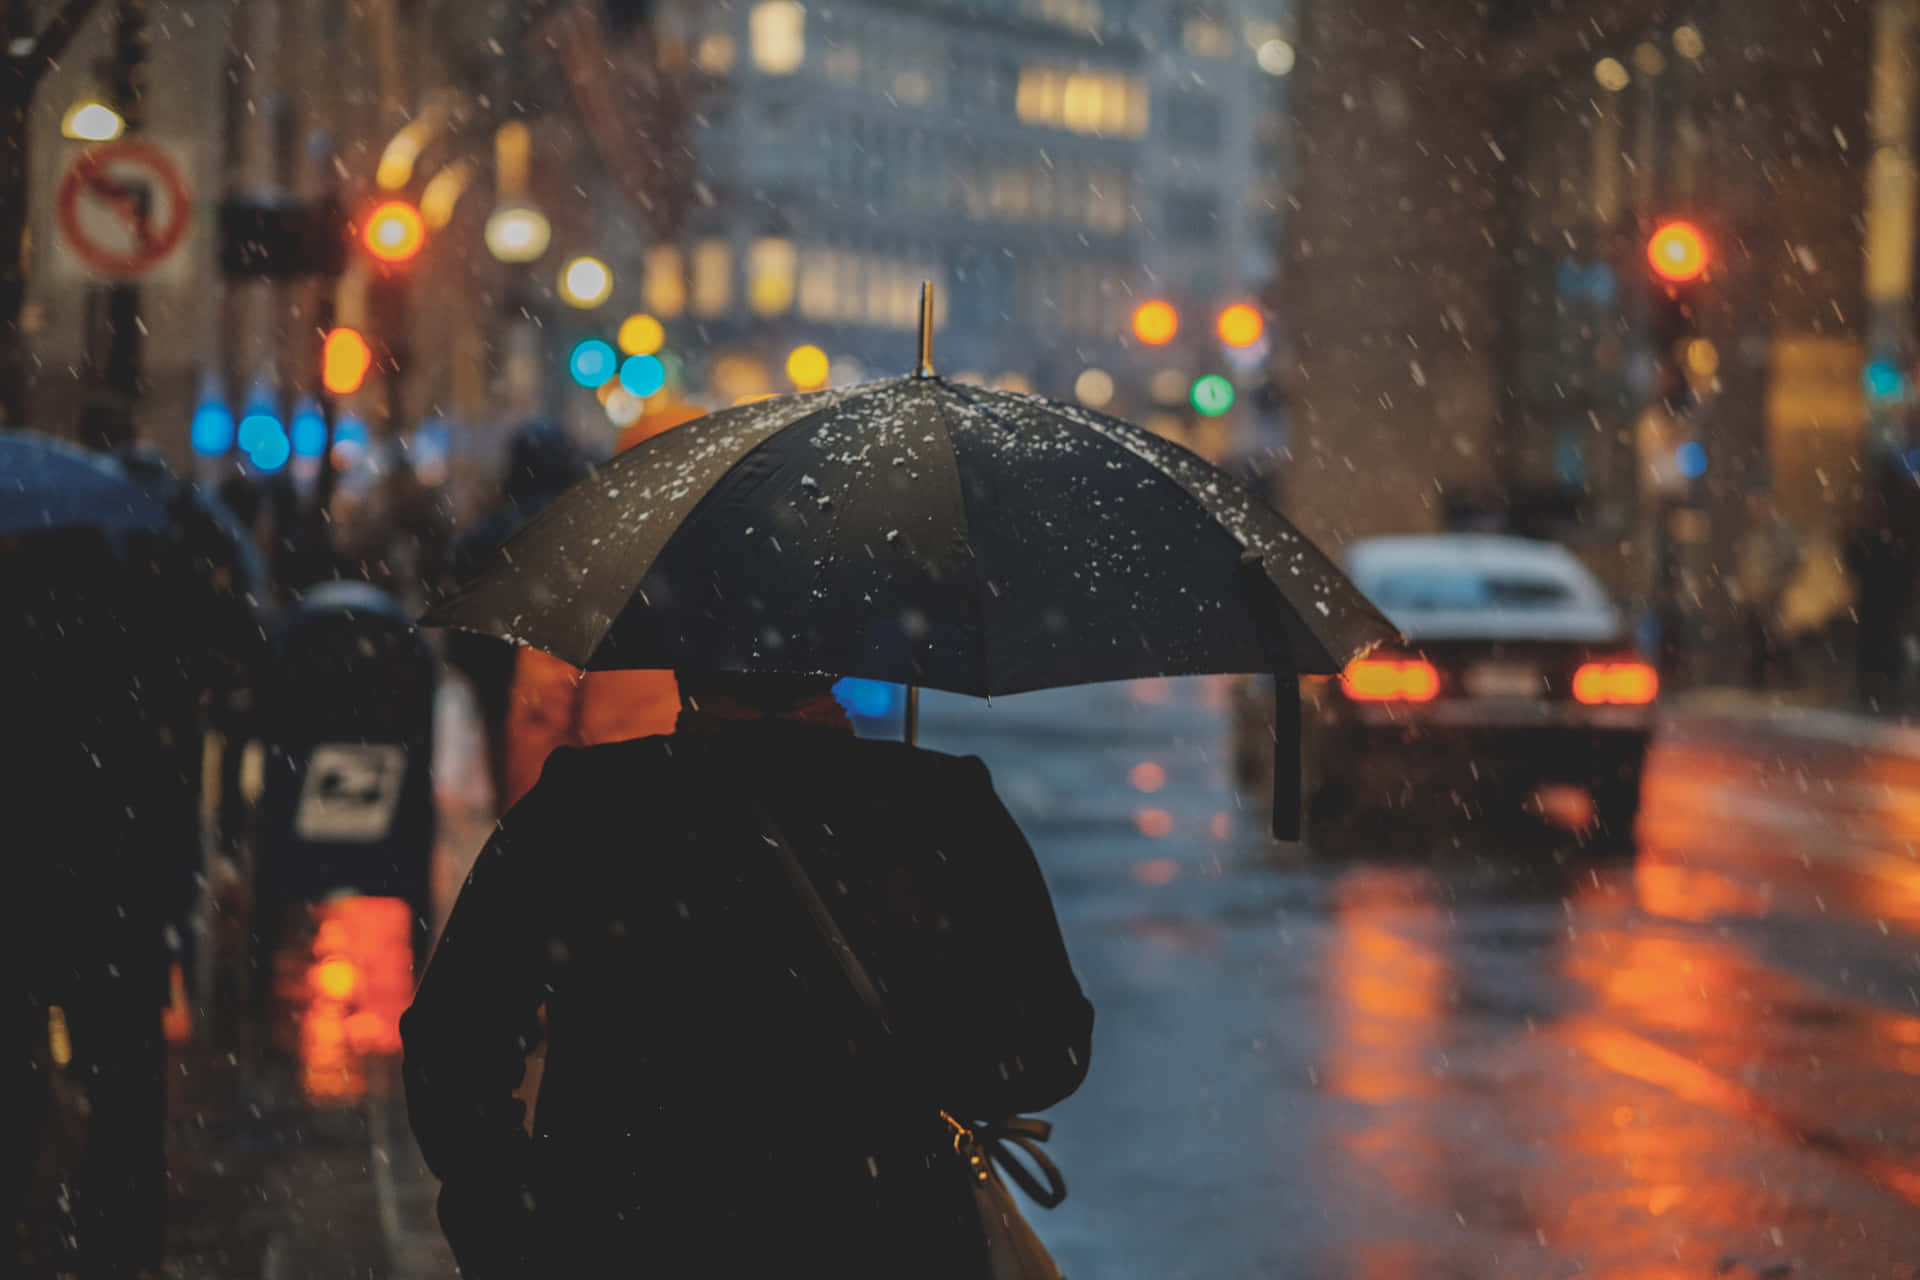 Man With Umbrella With City Lights During Rainy Day Picture